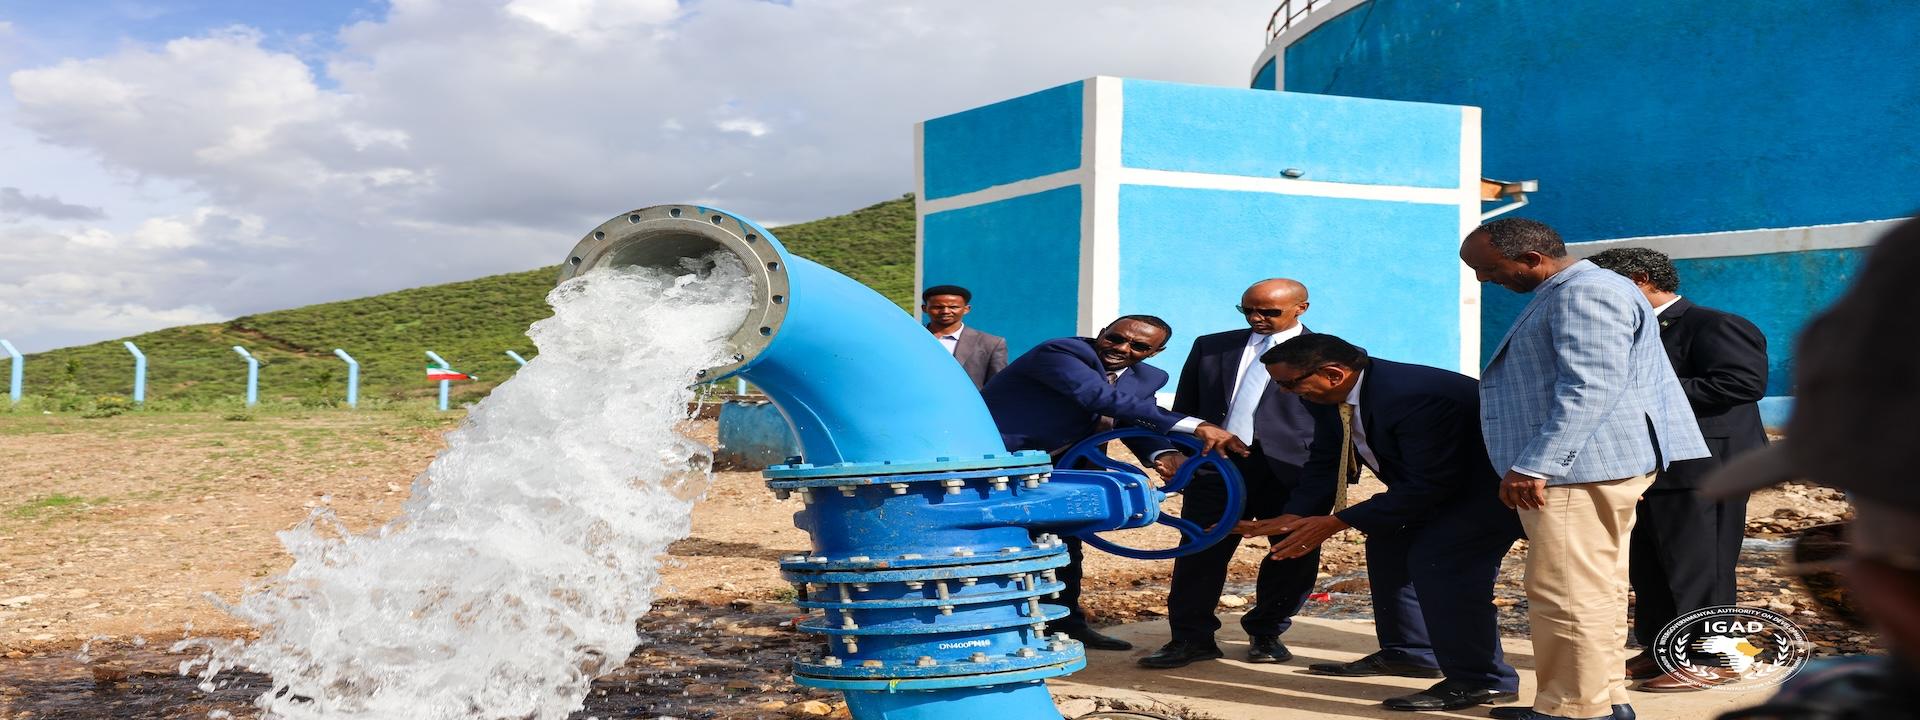 Access to groundwater to unlock sustainable solutions for the Horn of Africa